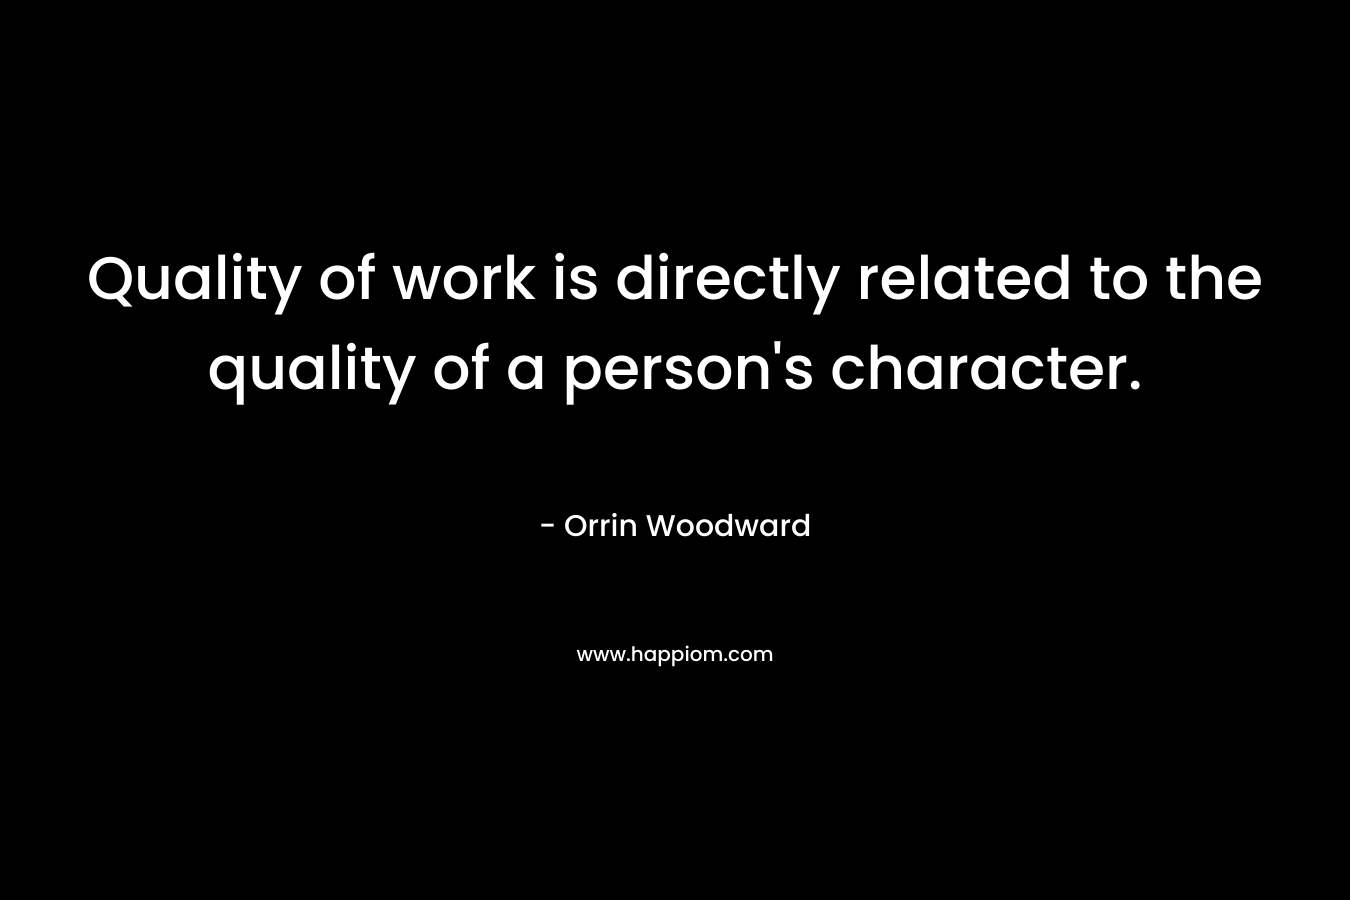 Quality of work is directly related to the quality of a person's character.